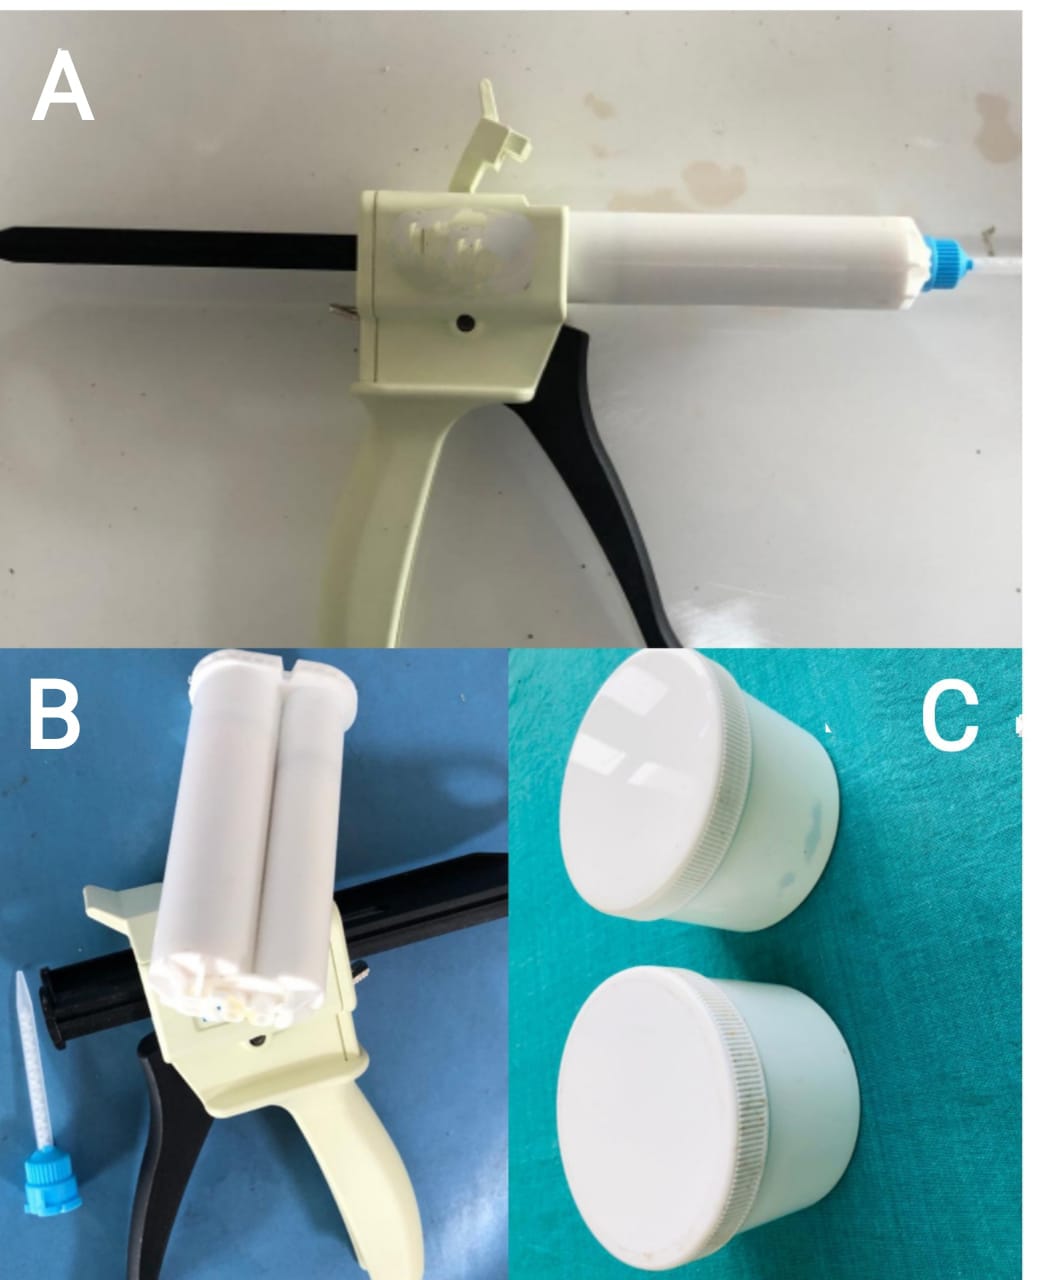 Fig4
A  Loaded dispensing gun with cartridge and syringe (mostly used for light body elastomeric impression material)
B Dis